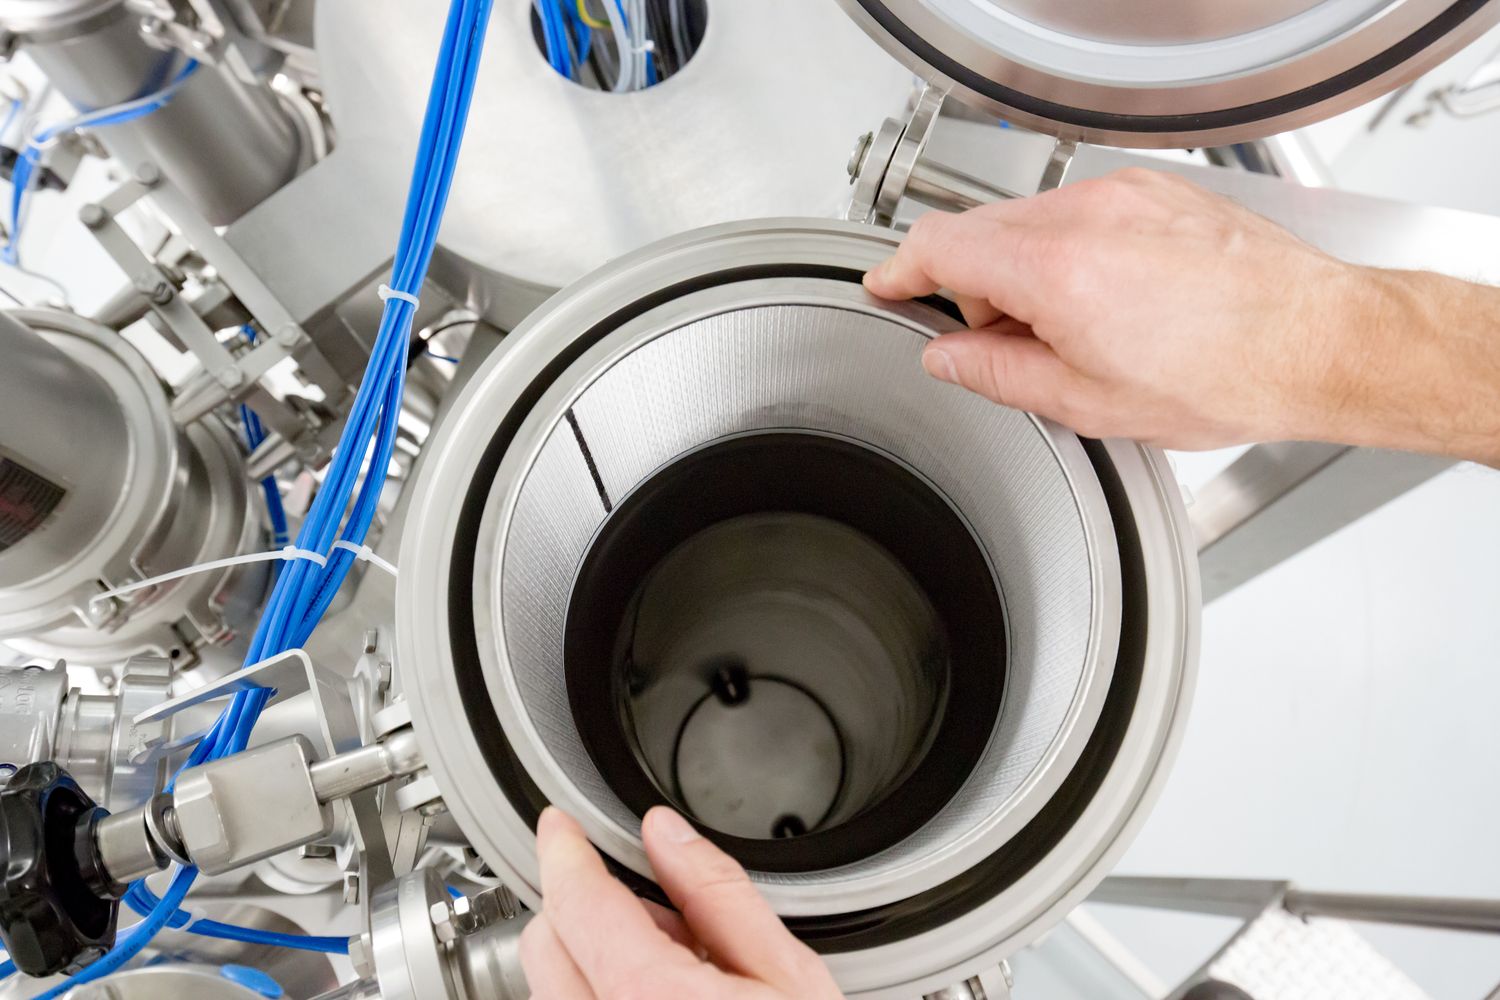 A person's hands carefully placing or inspecting a cylindrical filter element within a HECHT filtration system, highlighting the precision and maintenance aspect of industrial equipment. The focus on the filter's texture and the surrounding stainless steel components emphasizes the cleanliness and quality control in process environments.